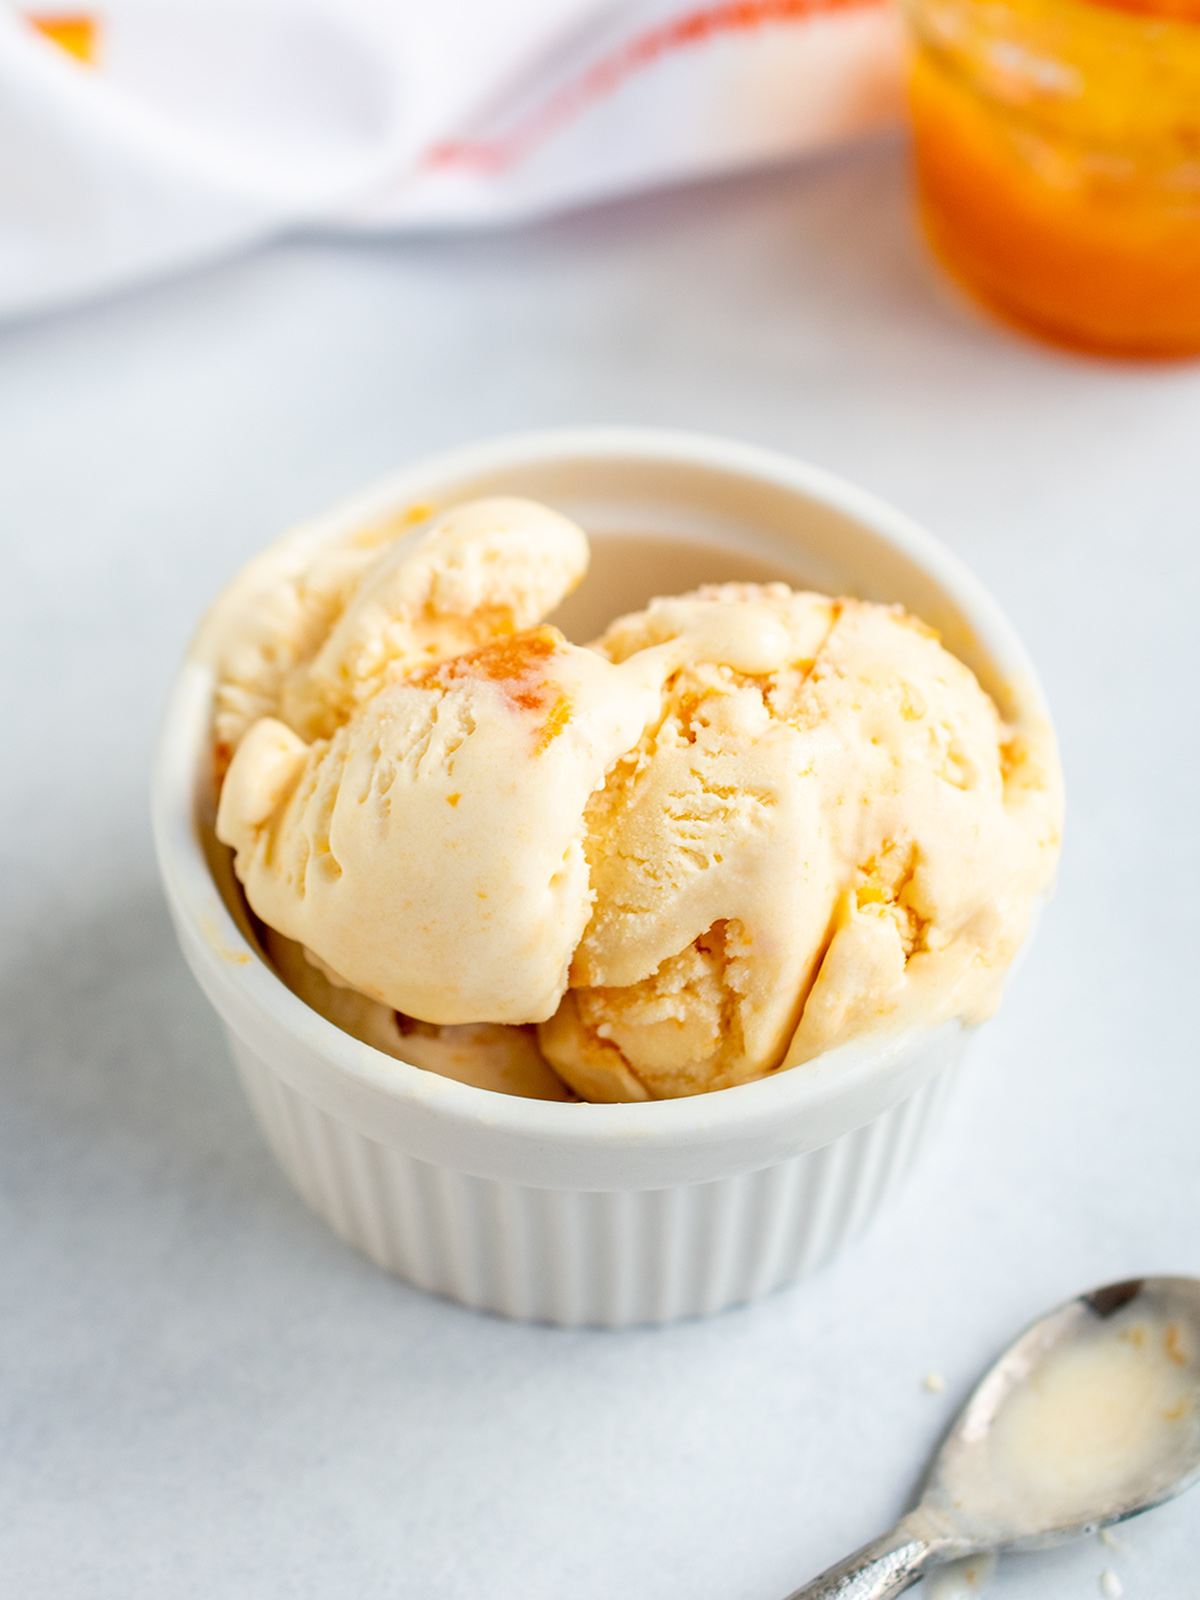 Scoop of apricot ice cream in white ramekin with silver spoon and jam jar in background.